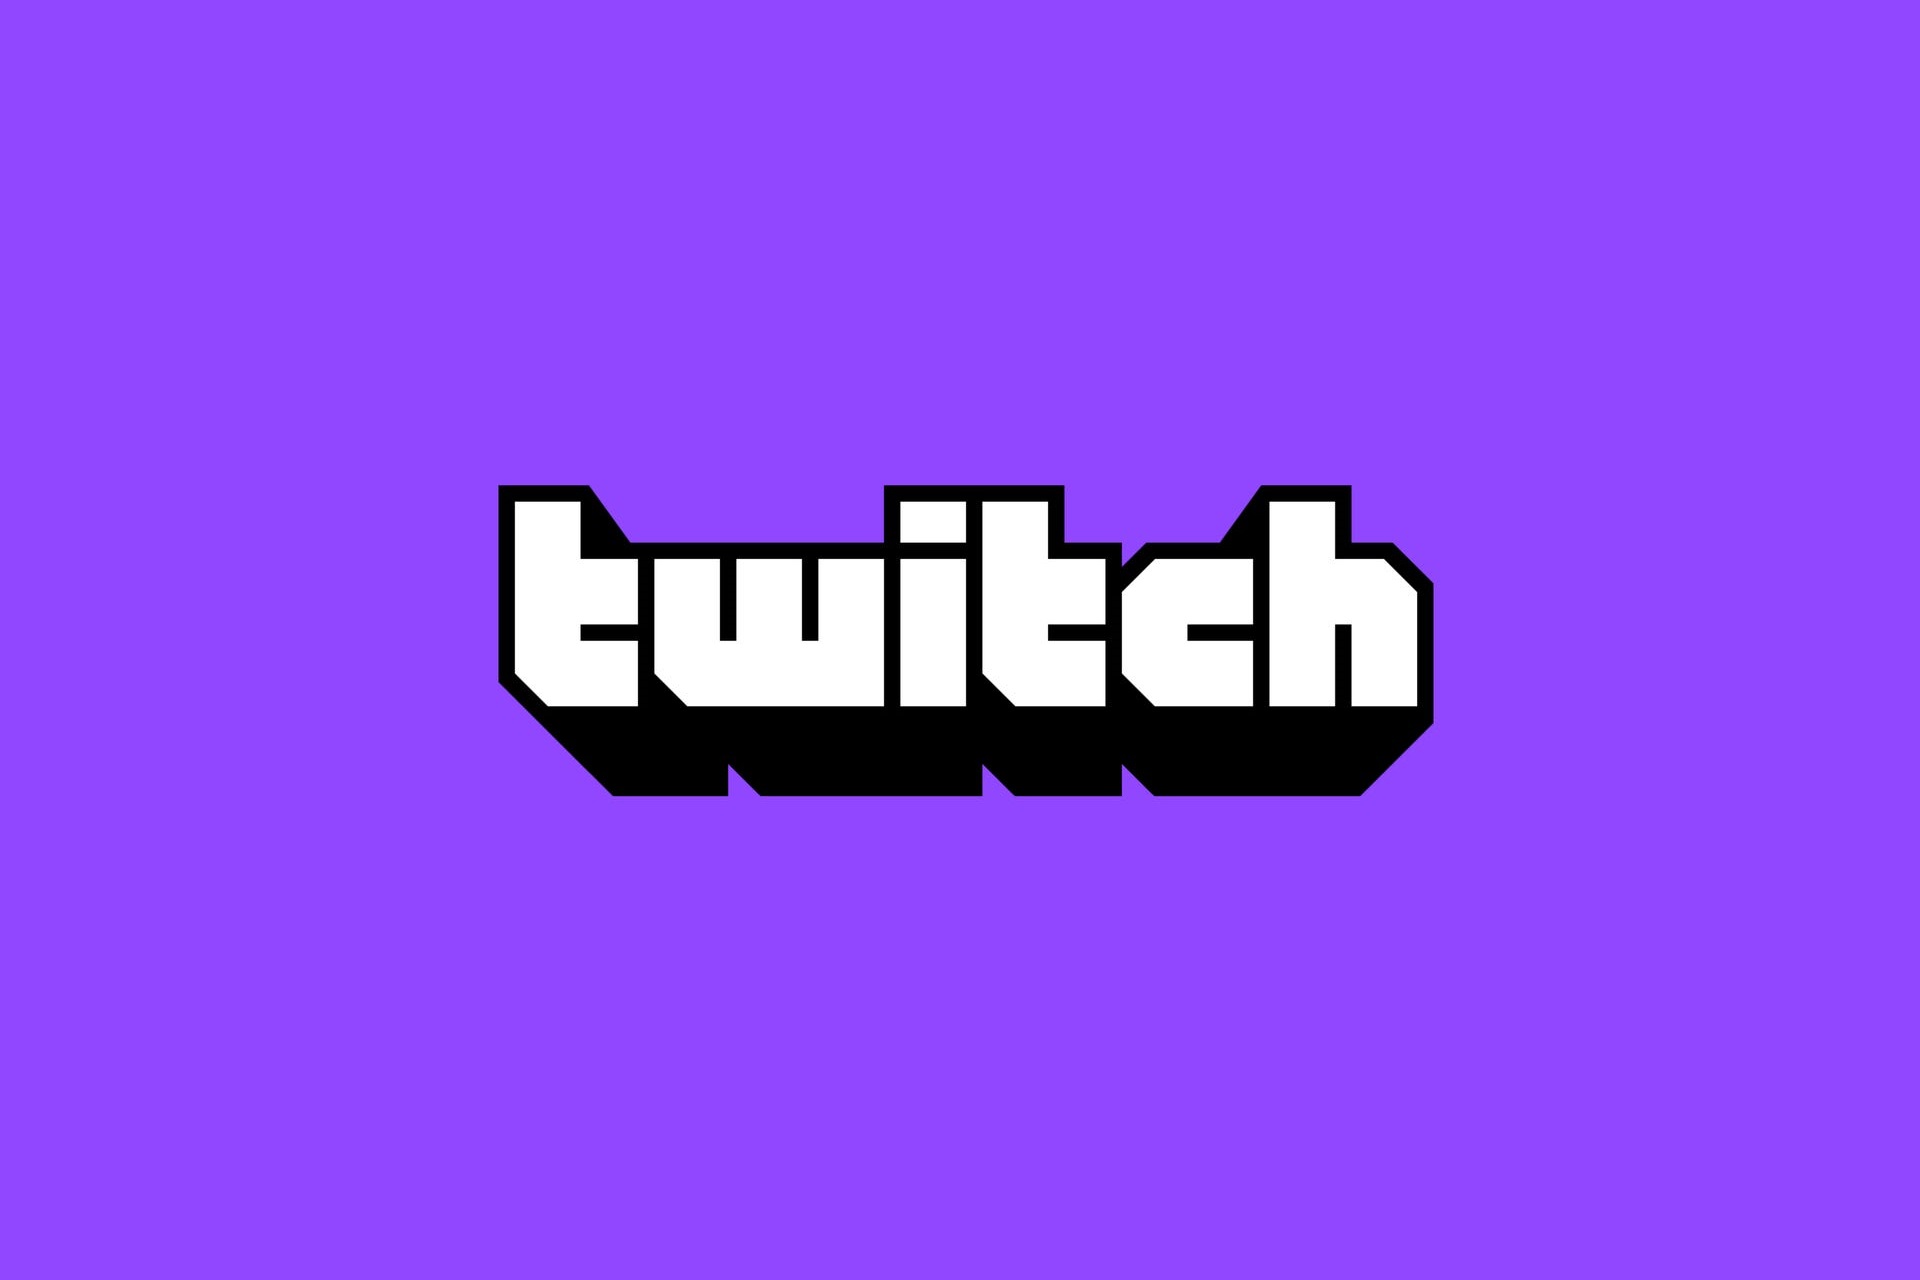 How To Fix Common Twitch Banner Issues Twitch Guides